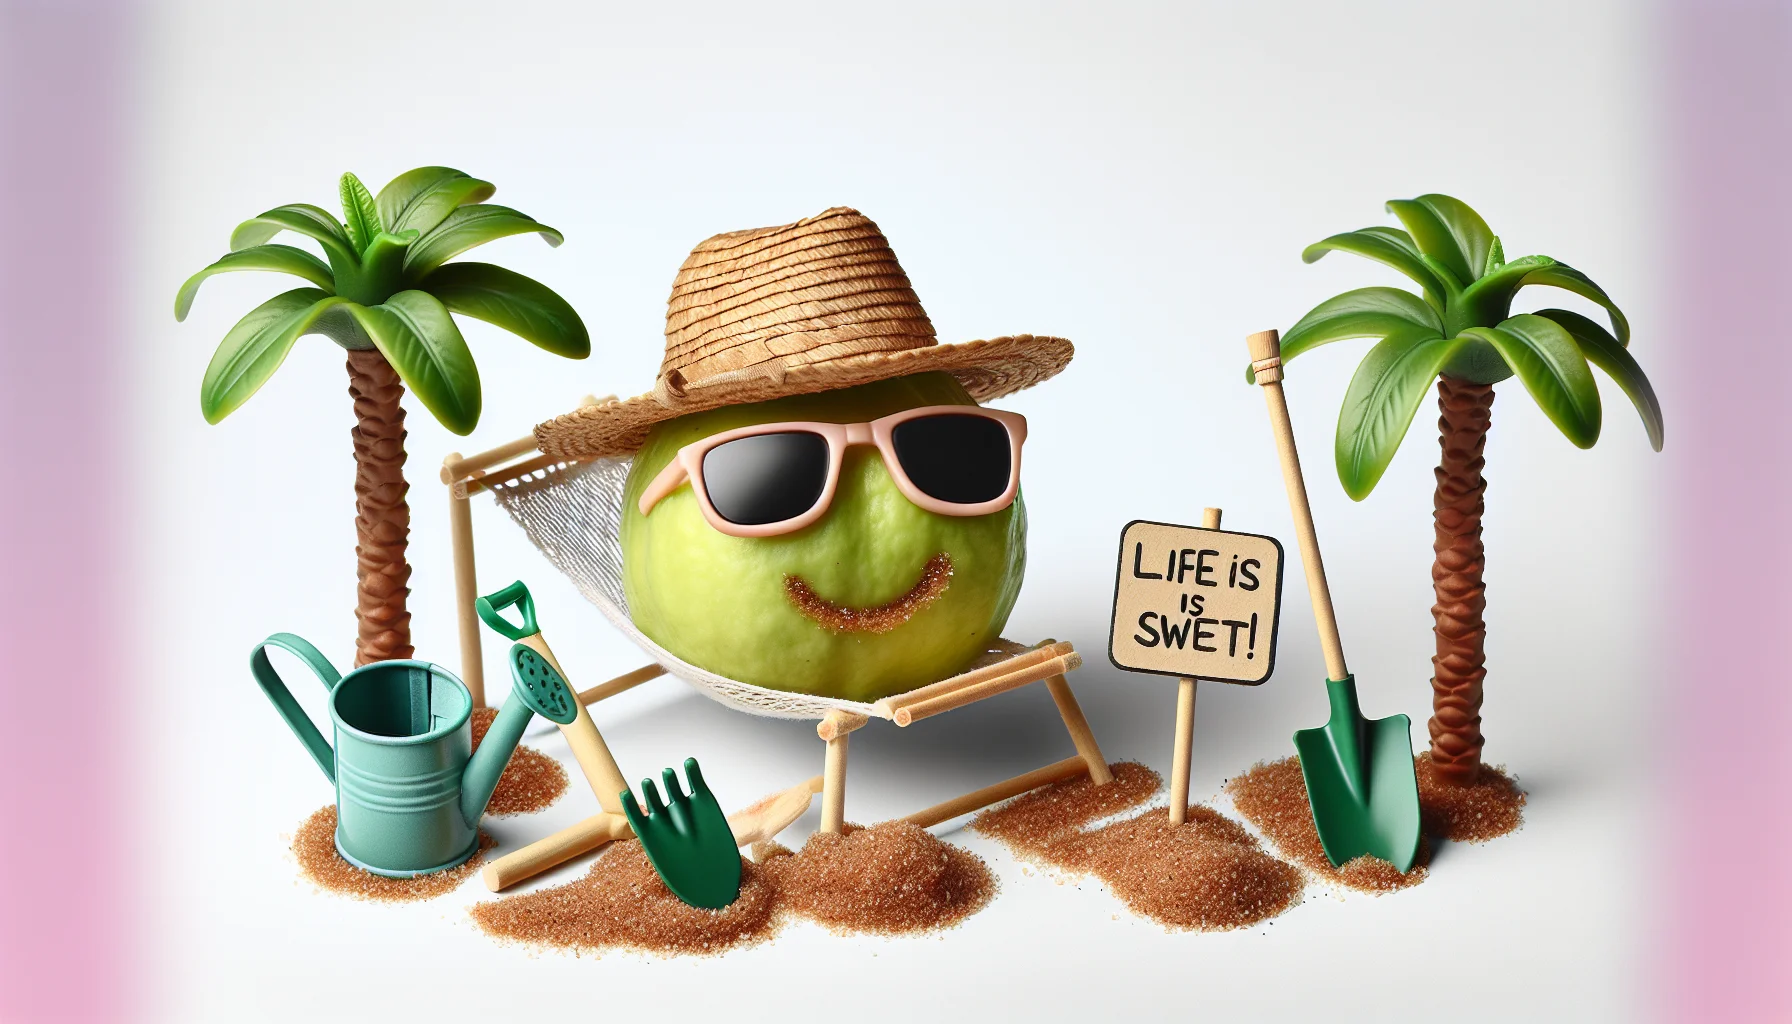 Create a delightful image that portrays an Asian guava fruit in a comical situation. Imagine the guava wearing a pair of sunglasses and a sun hat, lounging on a small hammock between two miniature tropical palm trees. Nearby, include a shovel and a watering can to highlight the theme of gardening. For comedic effect, add a small signboard nearby the guava that reads, 'Life is sweet!' To make it realistic, capture the texture and colors of the guava fruit and gardening tools accurately.